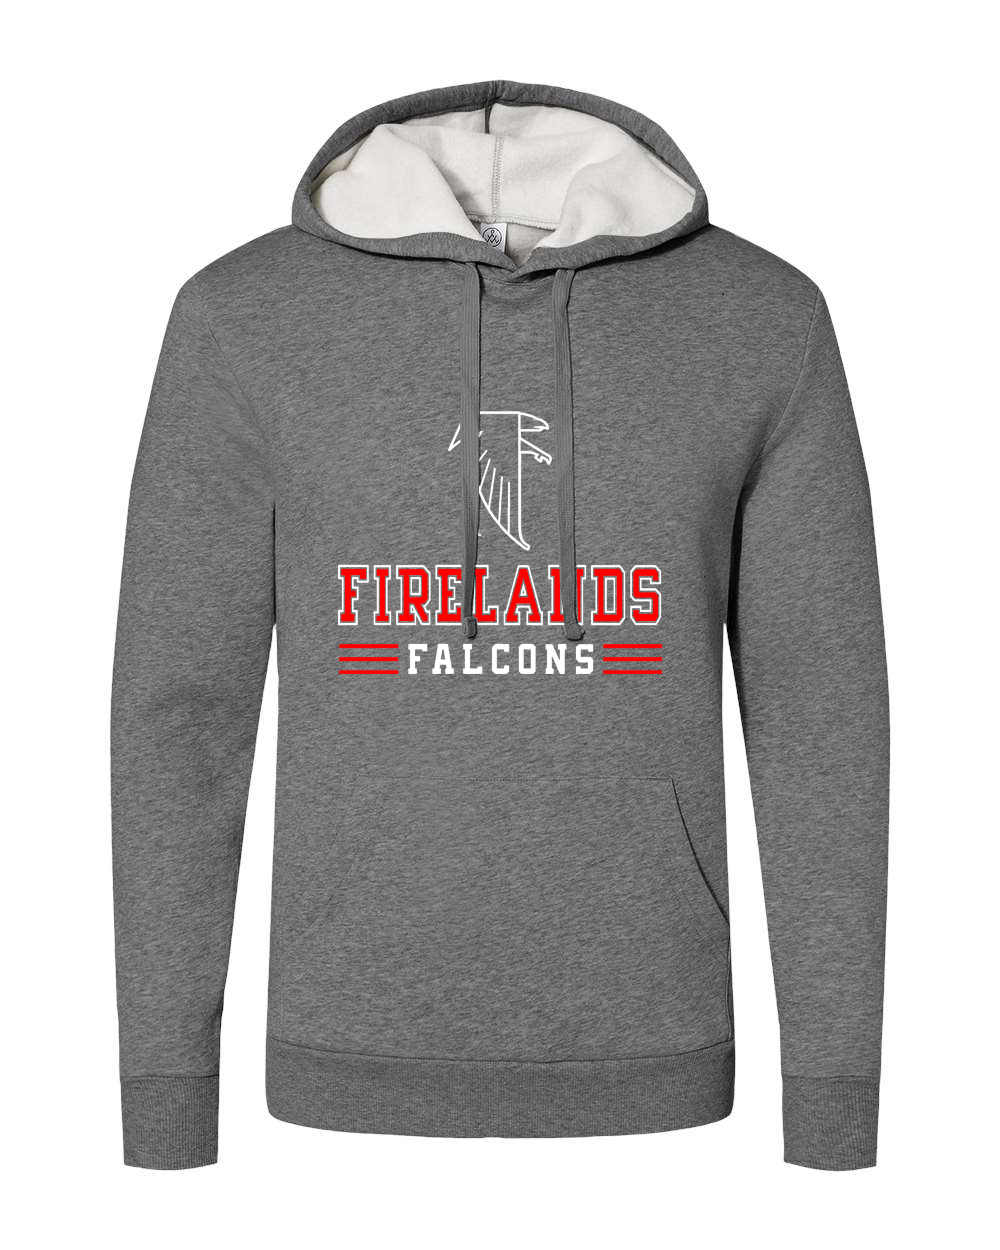 Adult - Firelands Falcons - Unisex Hoodie - Mistakes on the Lake